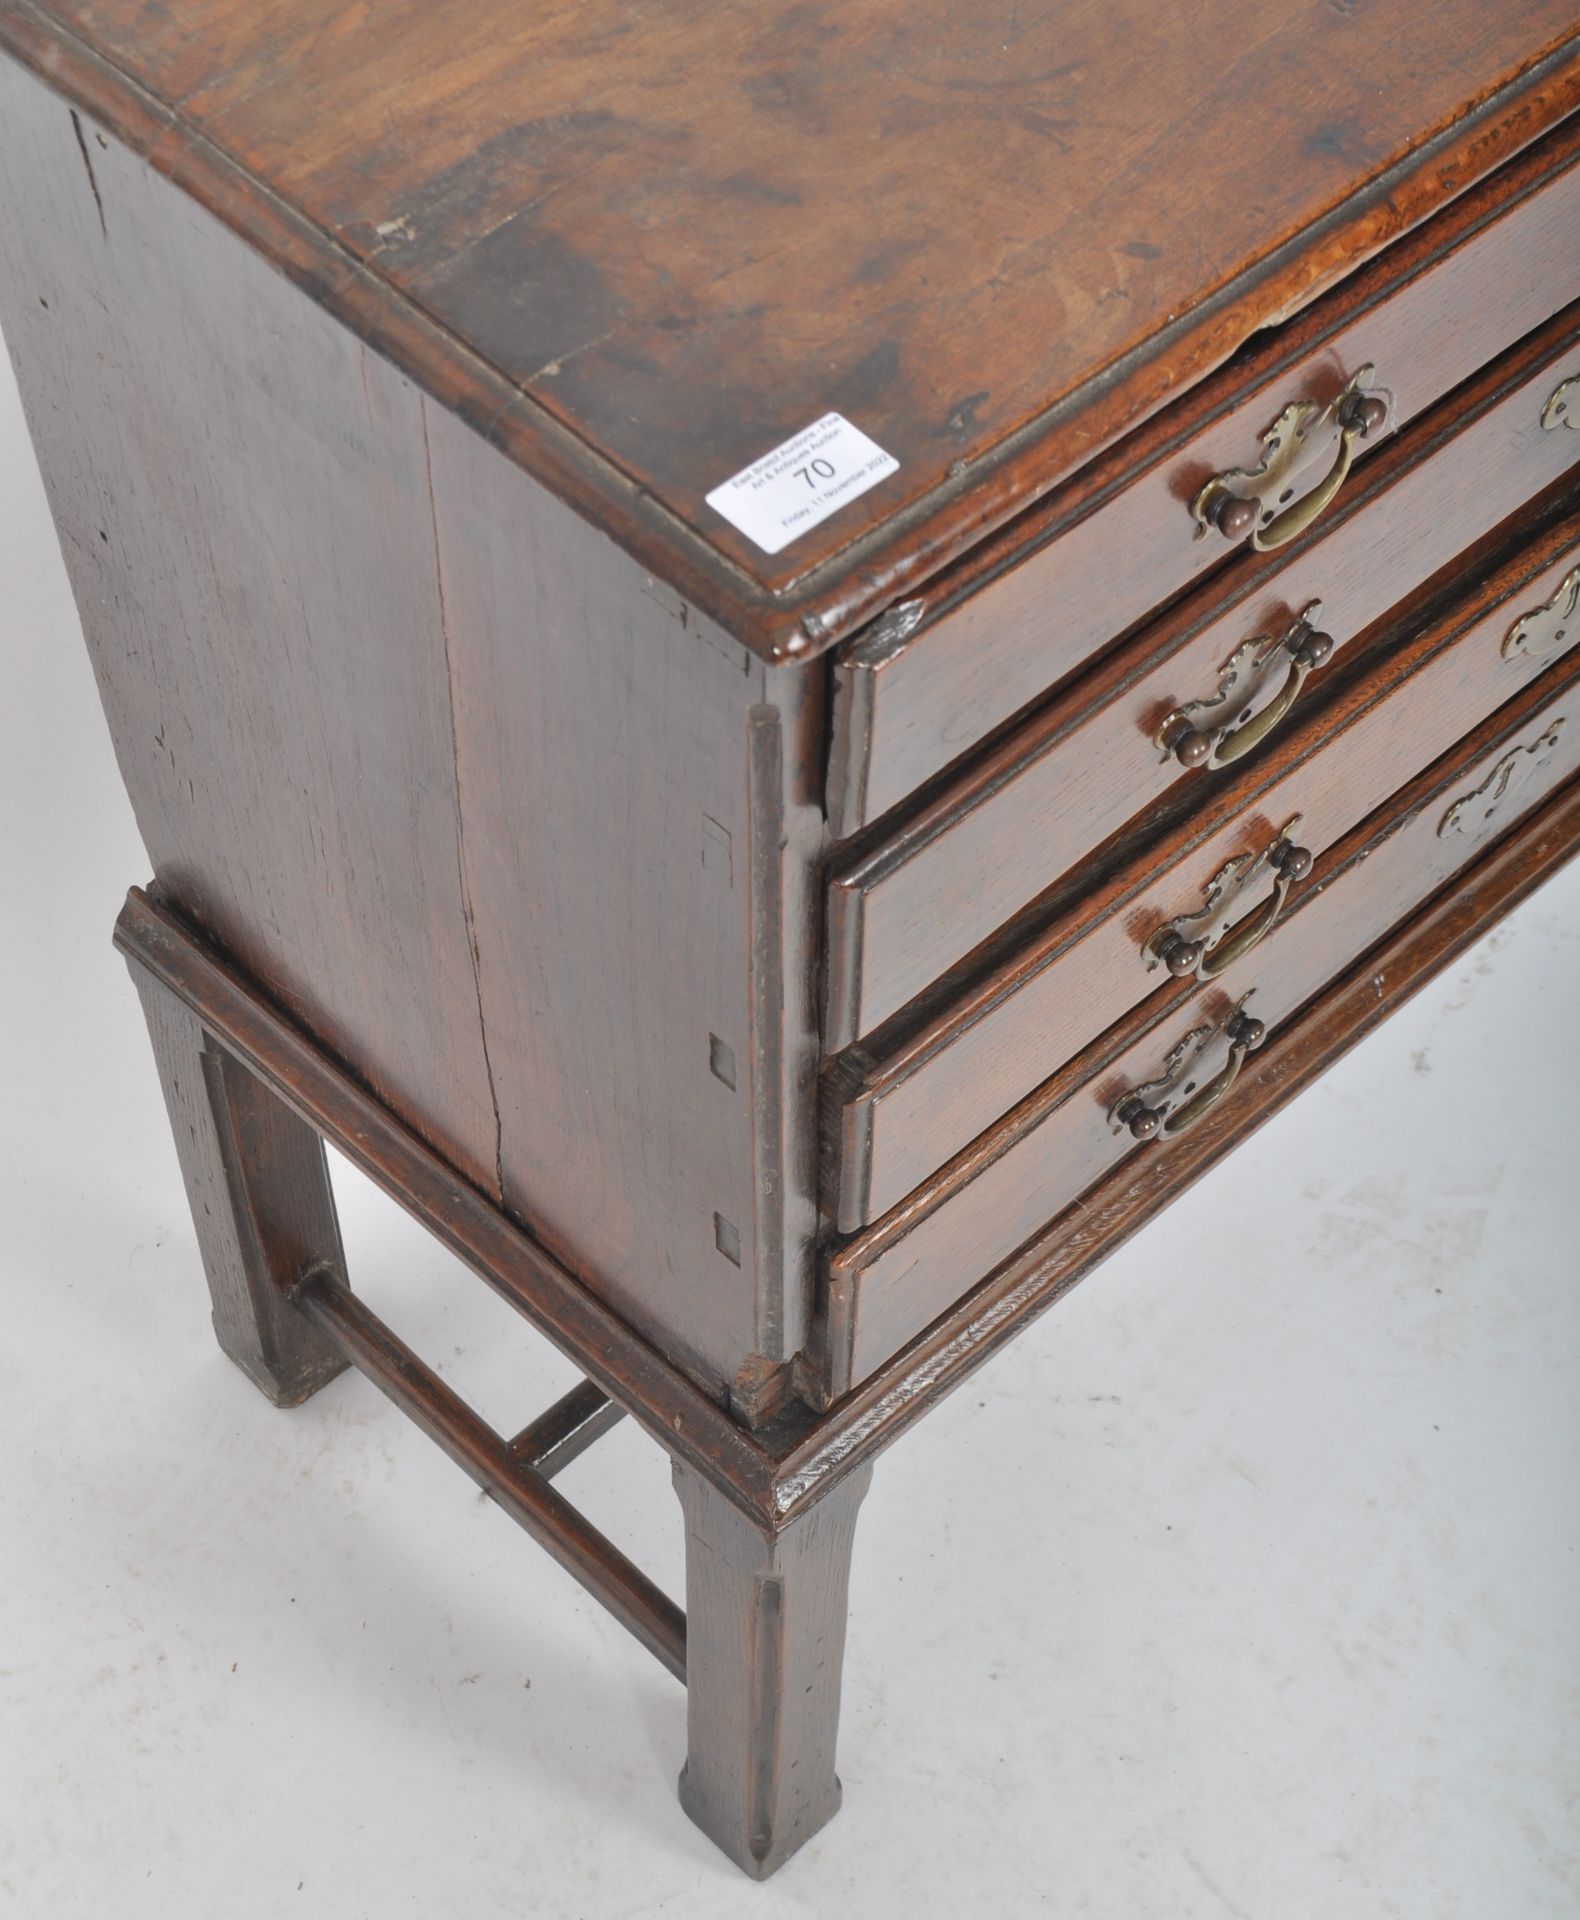 RARE 18TH CENTURY MINIATURE CHEST ON STAND - Image 7 of 9